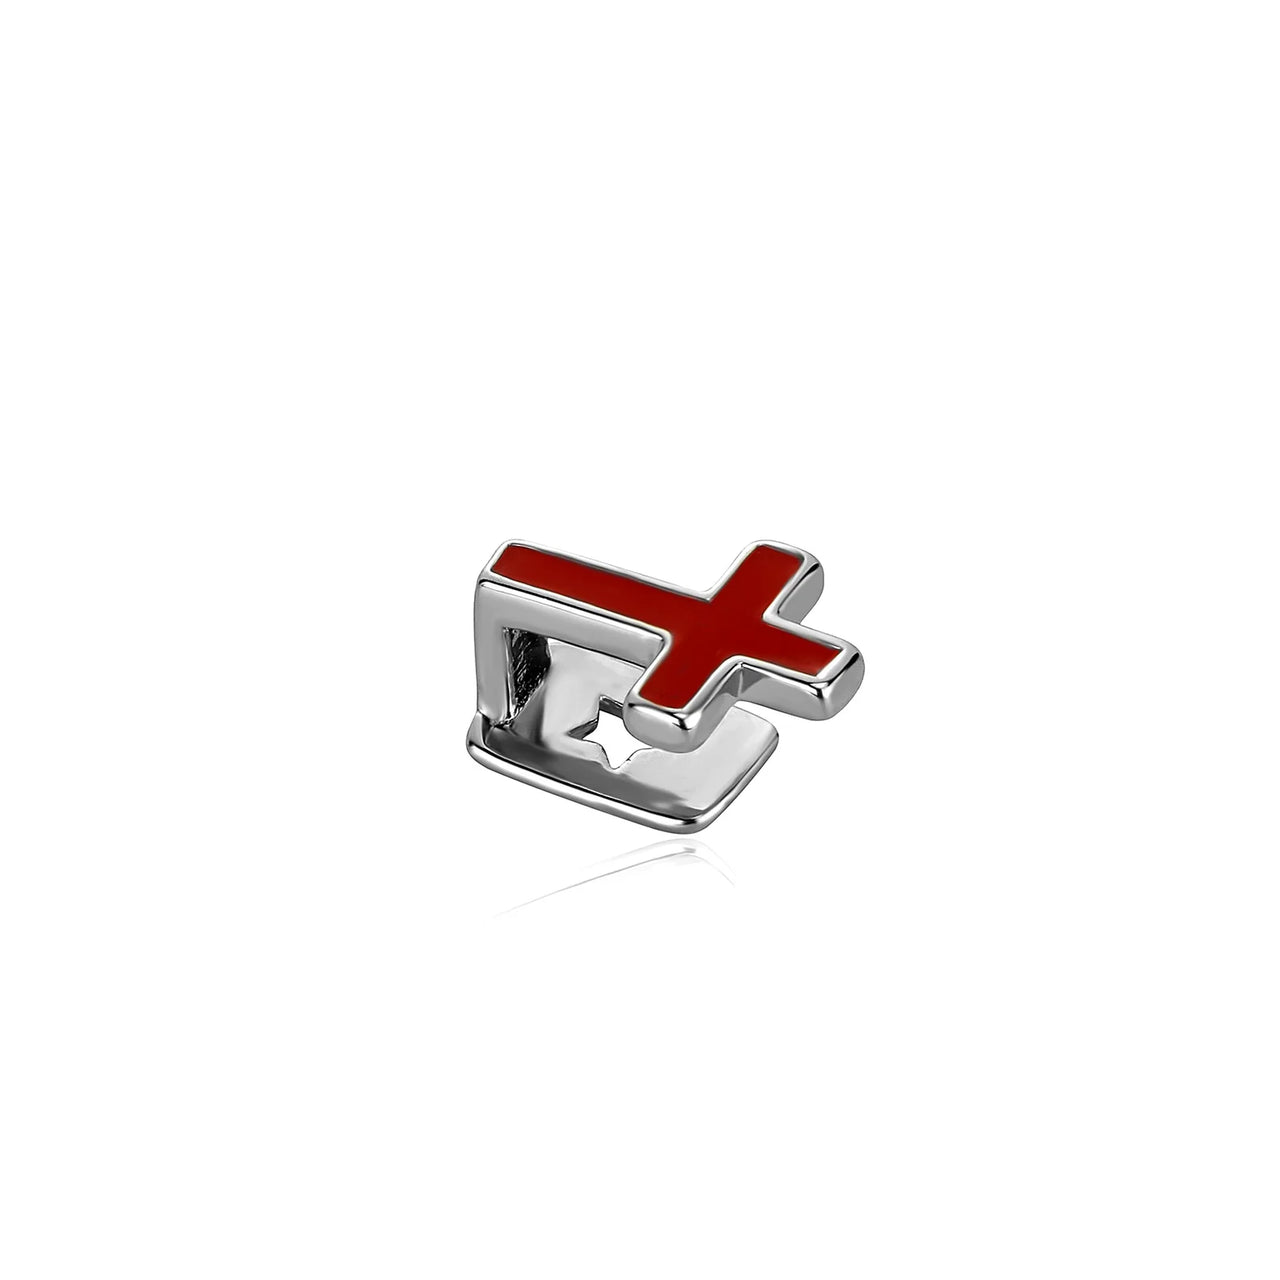 Enamel Cross Single Tooth Grillz - Different Drips